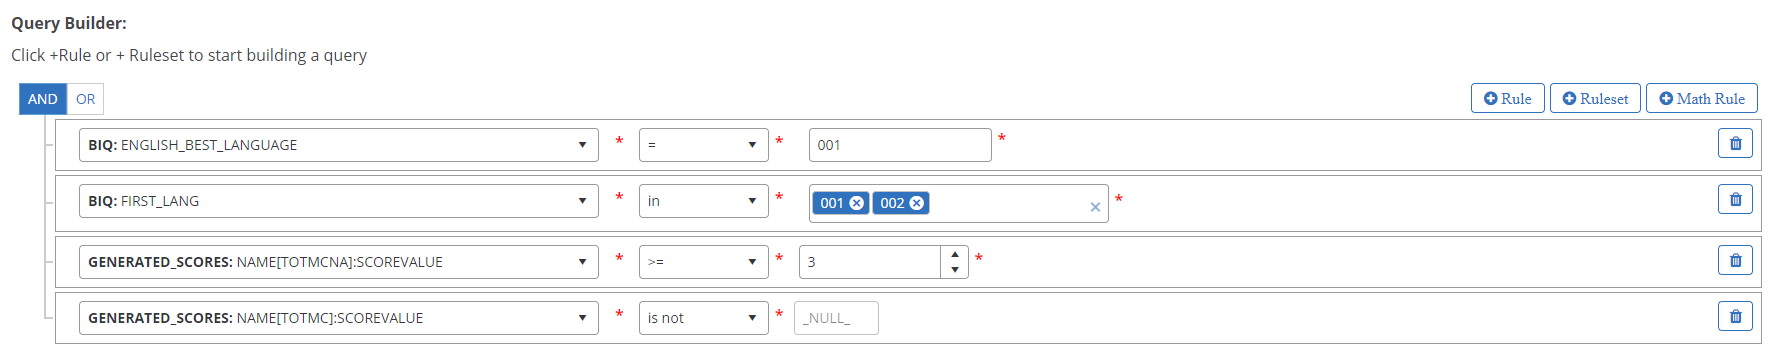 Query Builder in Add Query Modal with Rules, Rulesets with GENERATED_SCORES